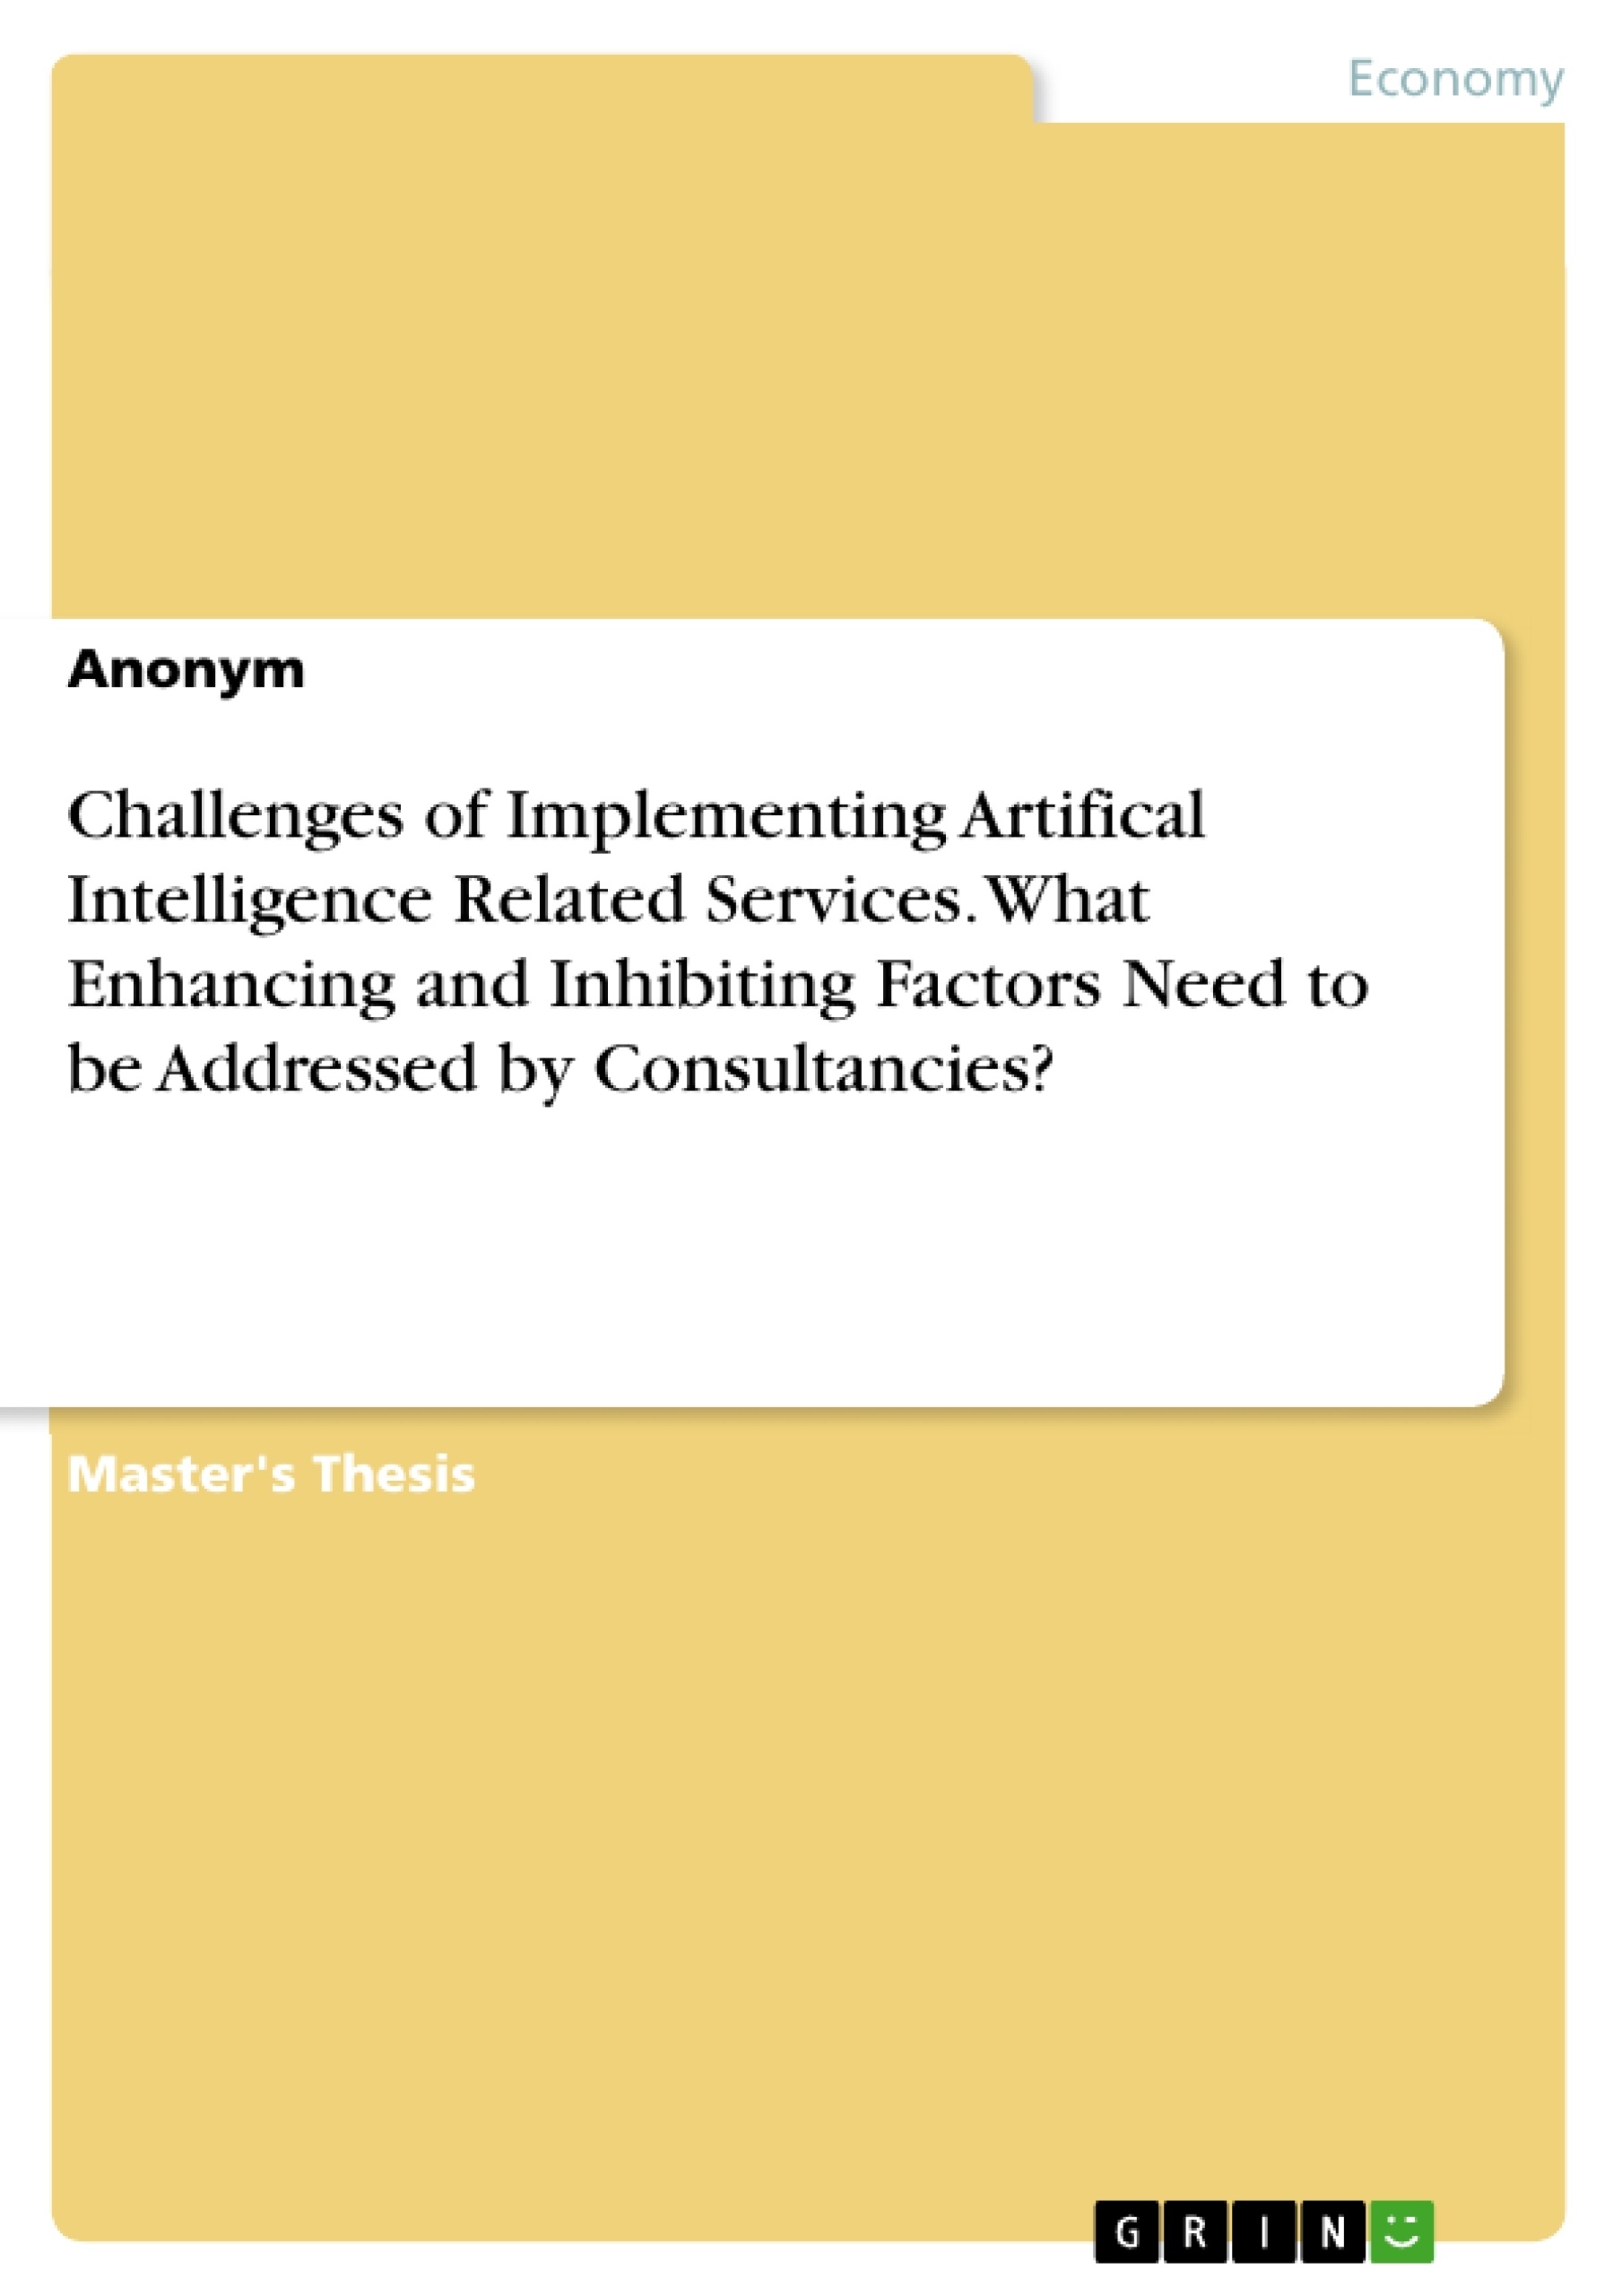 Title: Challenges of Implementing Artifical Intelligence Related Services. What Enhancing and Inhibiting Factors Need to be Addressed by Consultancies?